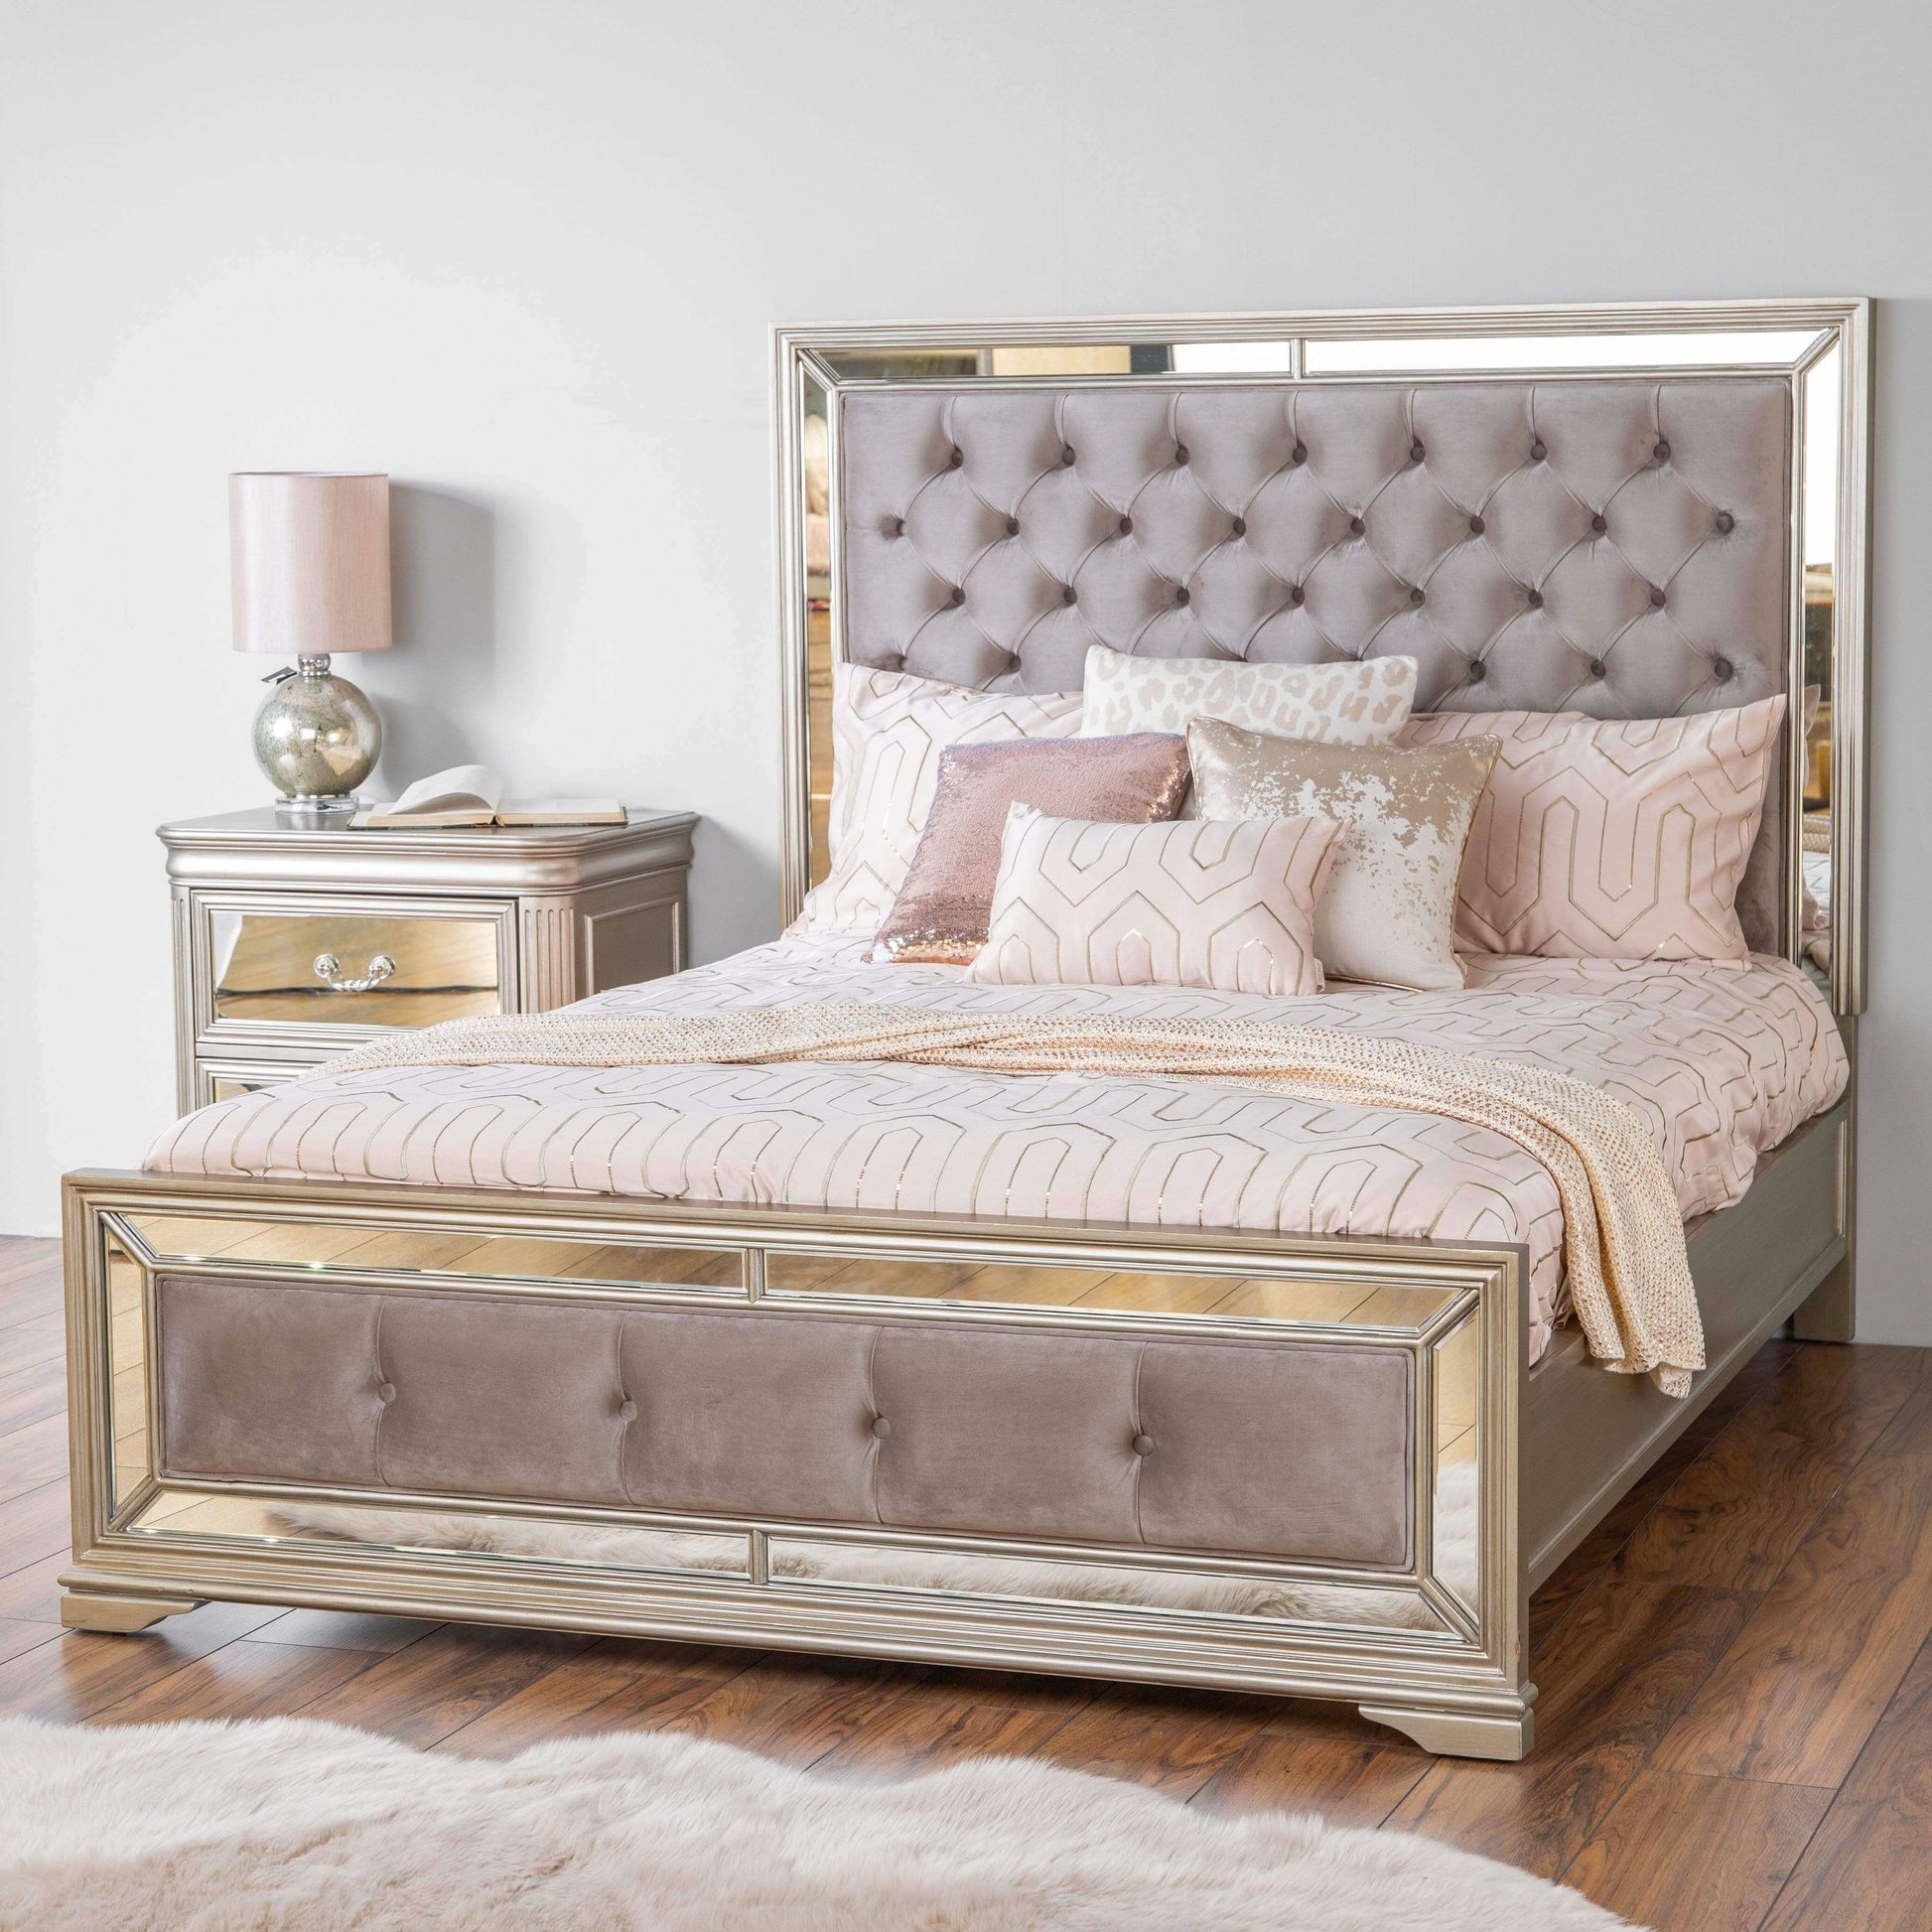 Furniture  -  Clio King Size Velvet Mirrored Bedframe - Taupe  -  50148686